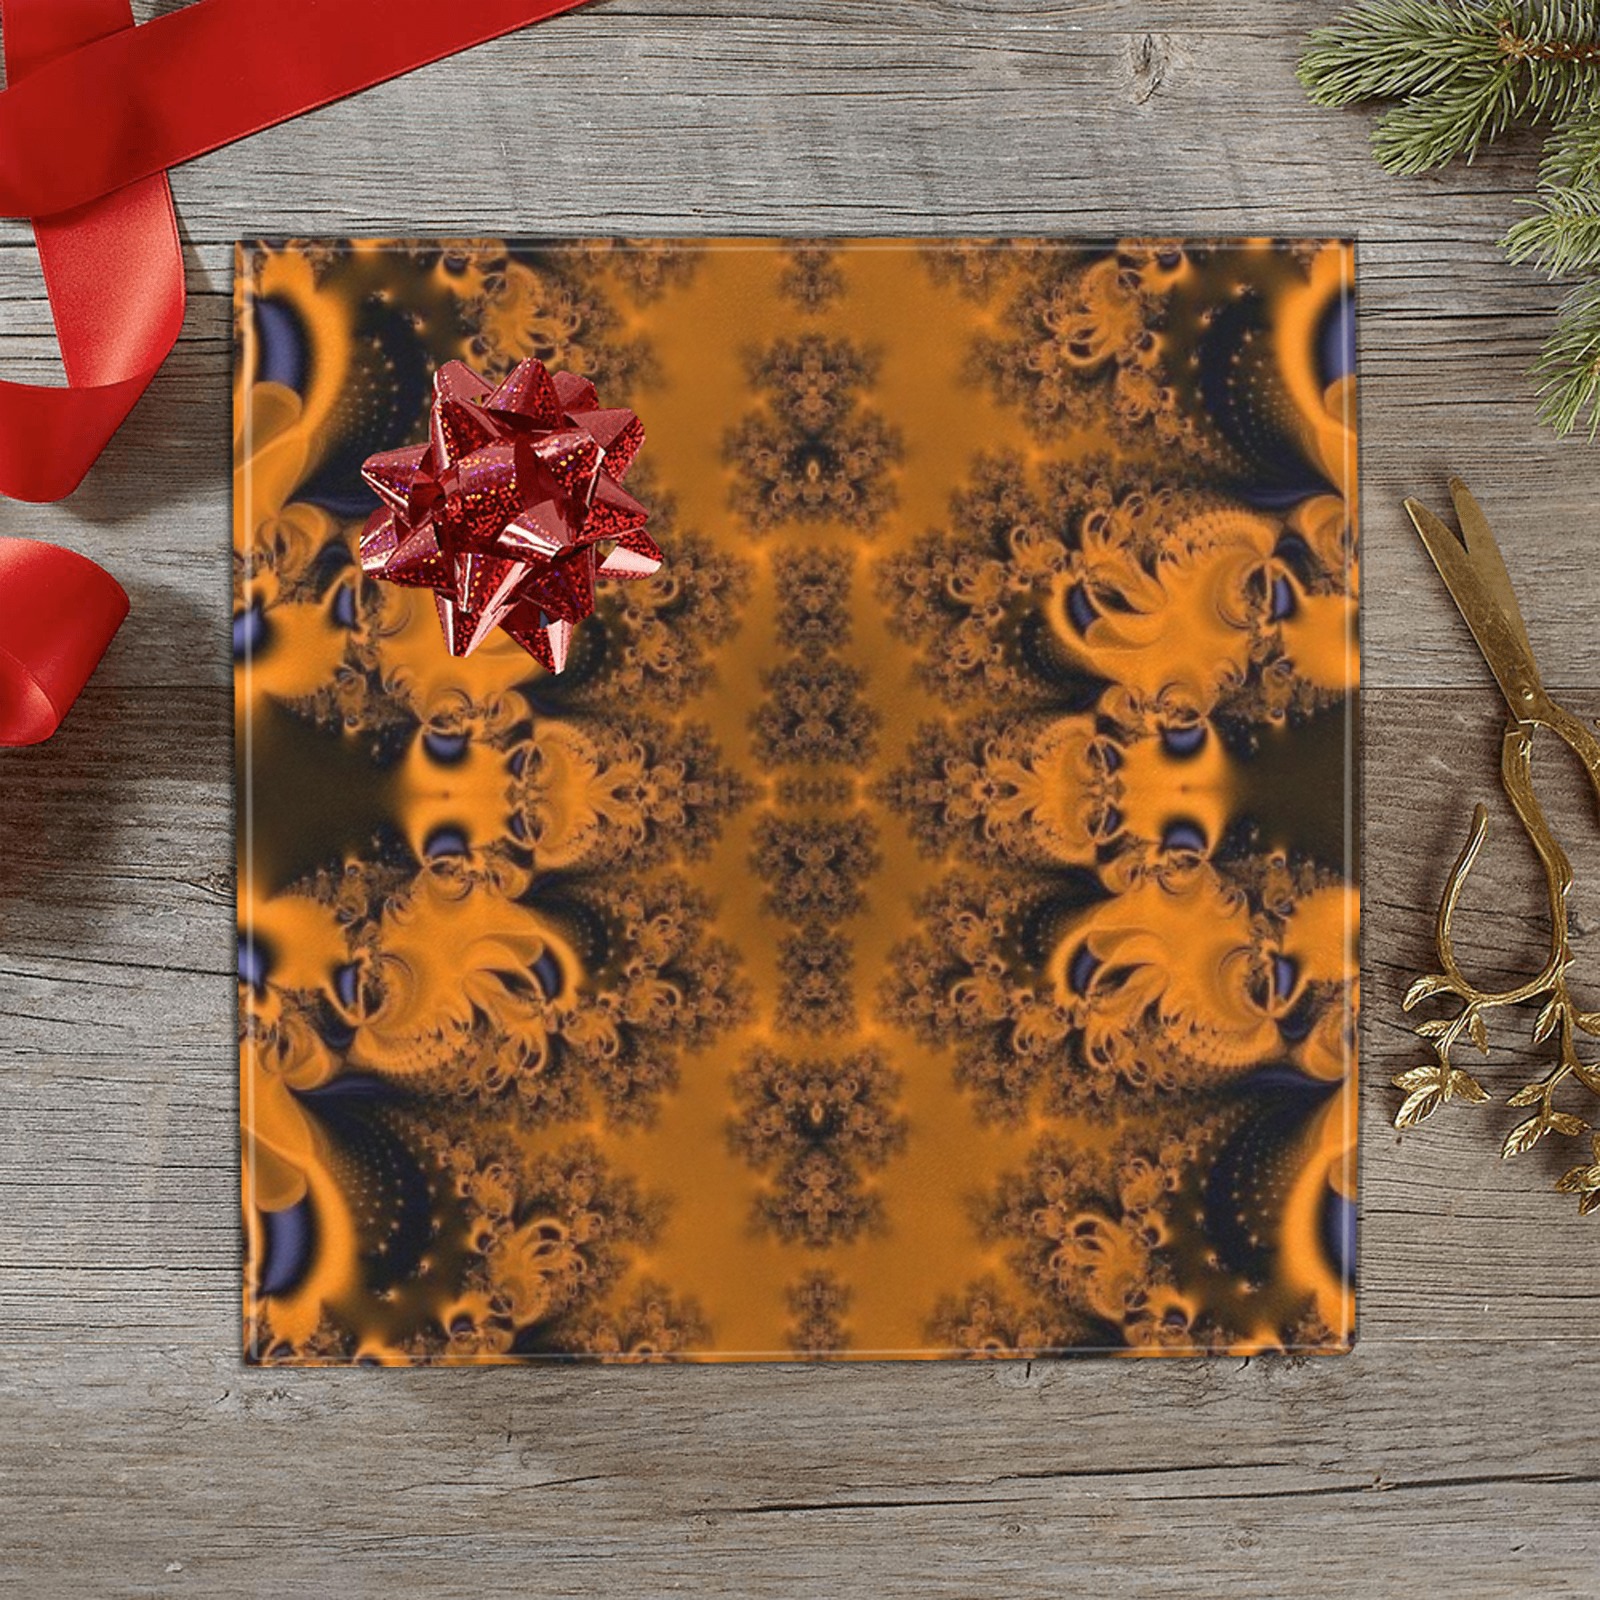 Orange Groves at Dusk Frost Fractal Gift Wrapping Paper 58"x 23" (2 Rolls)